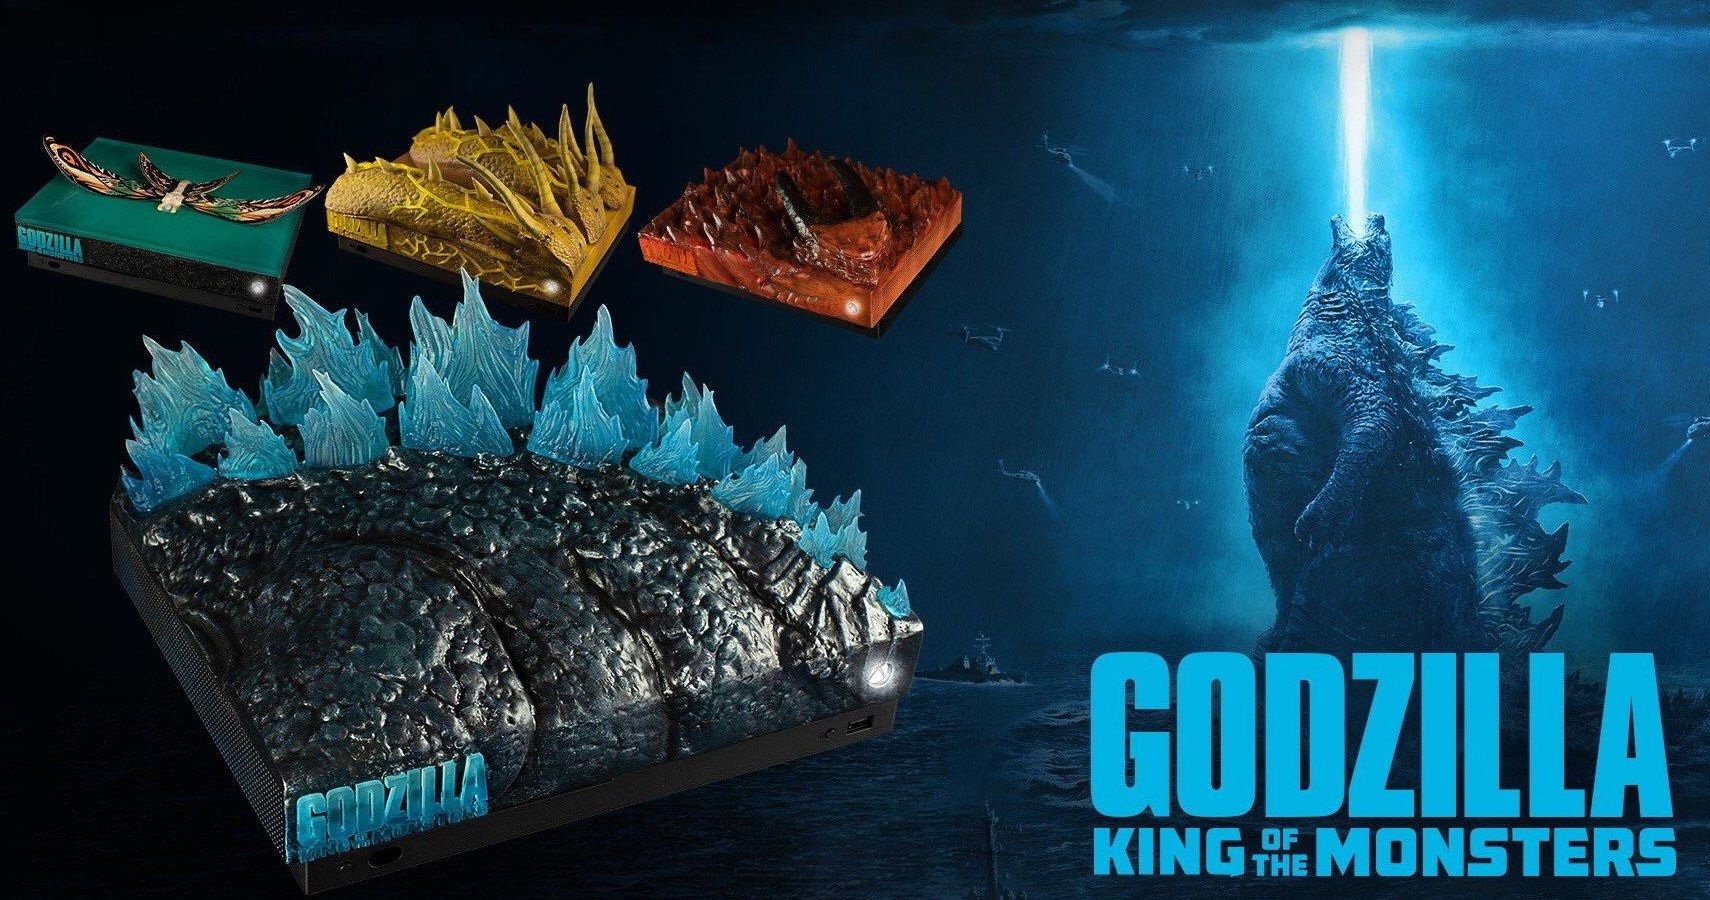 A Sweet Godzilla Custom Xbox Is Coming Even Though Theres No New Godzilla Game